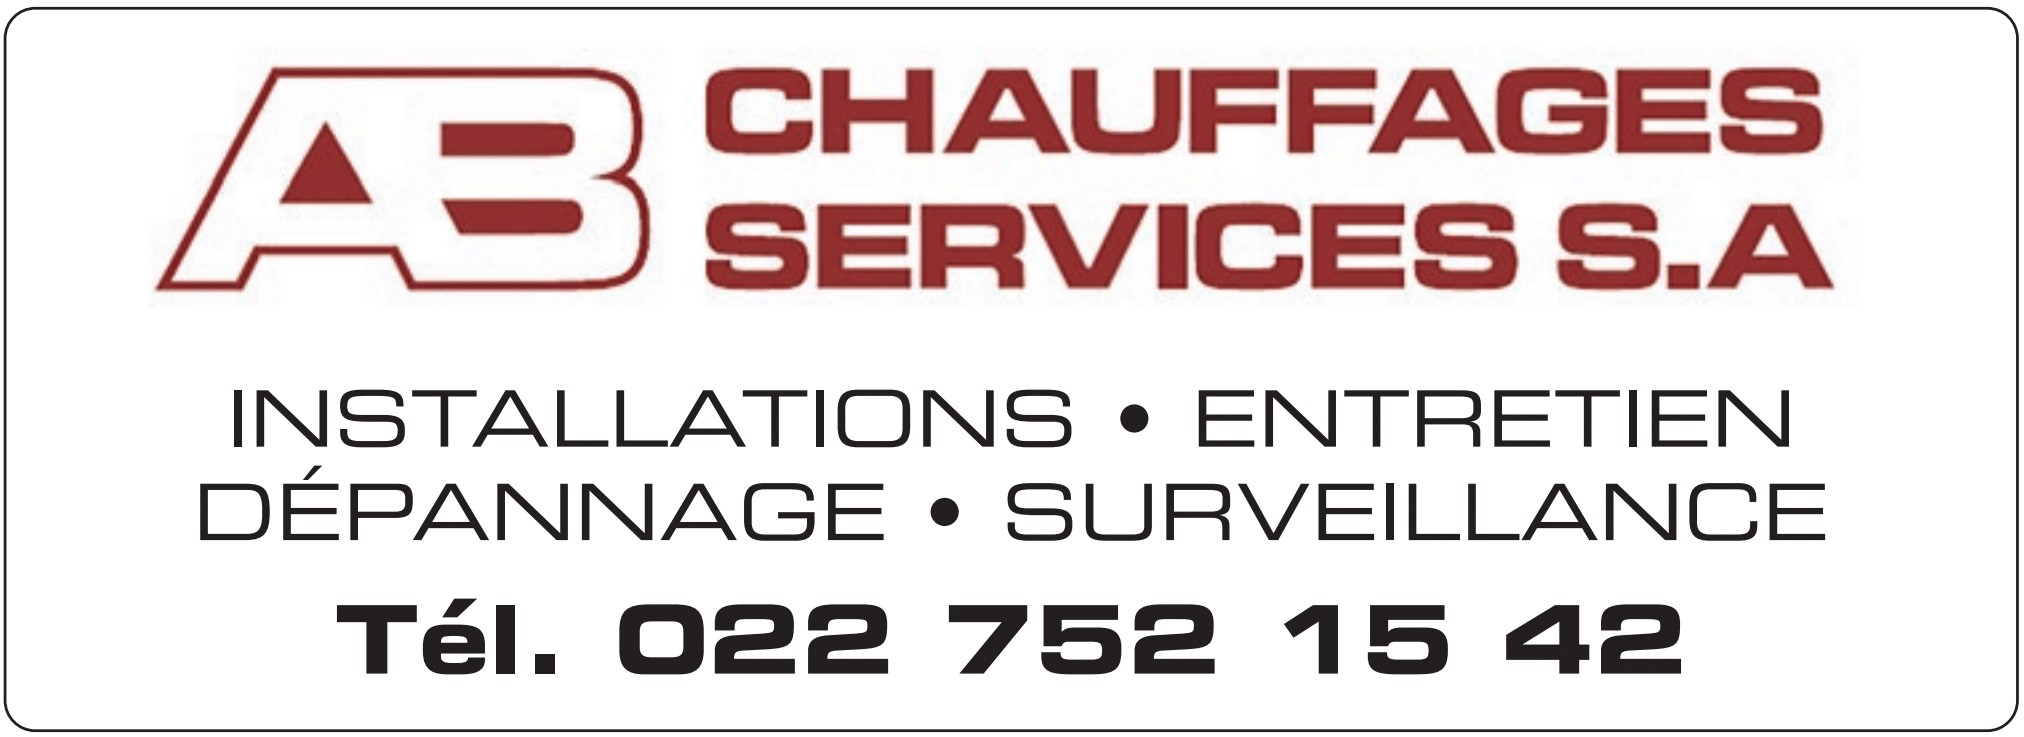 AB chauffages services S.A